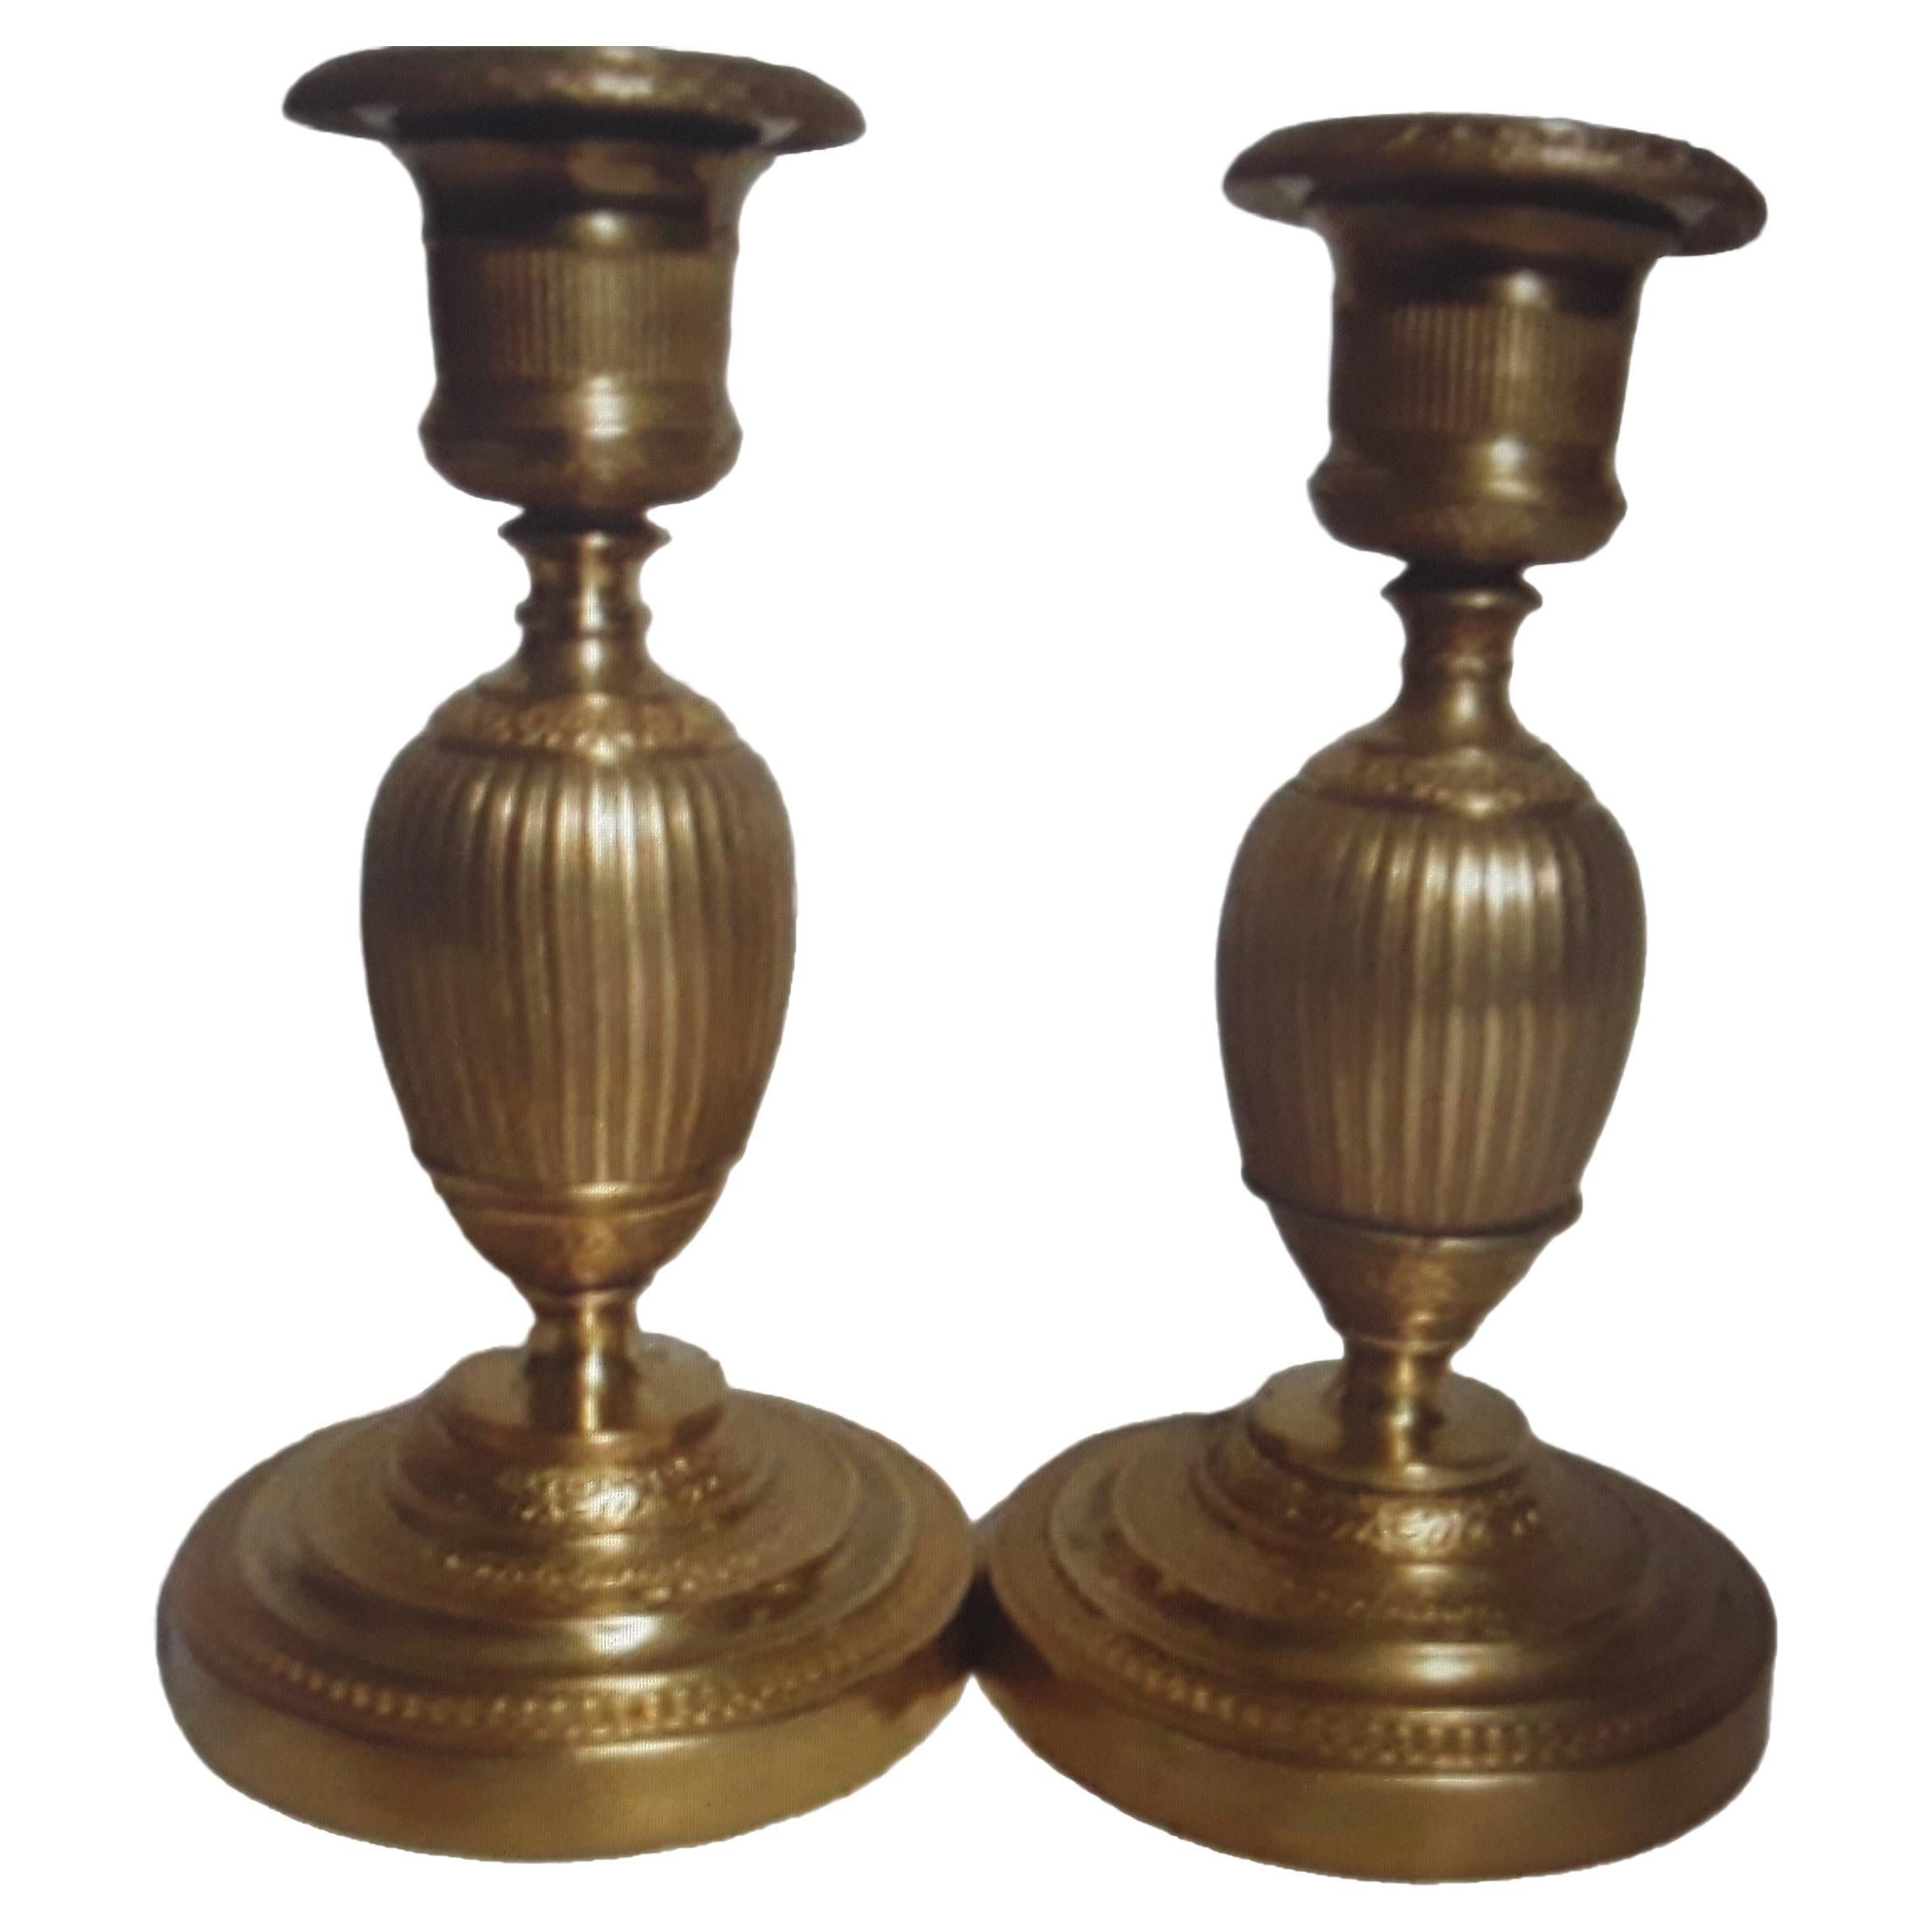 Pair c1810 French Empire Gilt Bronze Detailed Ovoid Form Candle Holders For Sale